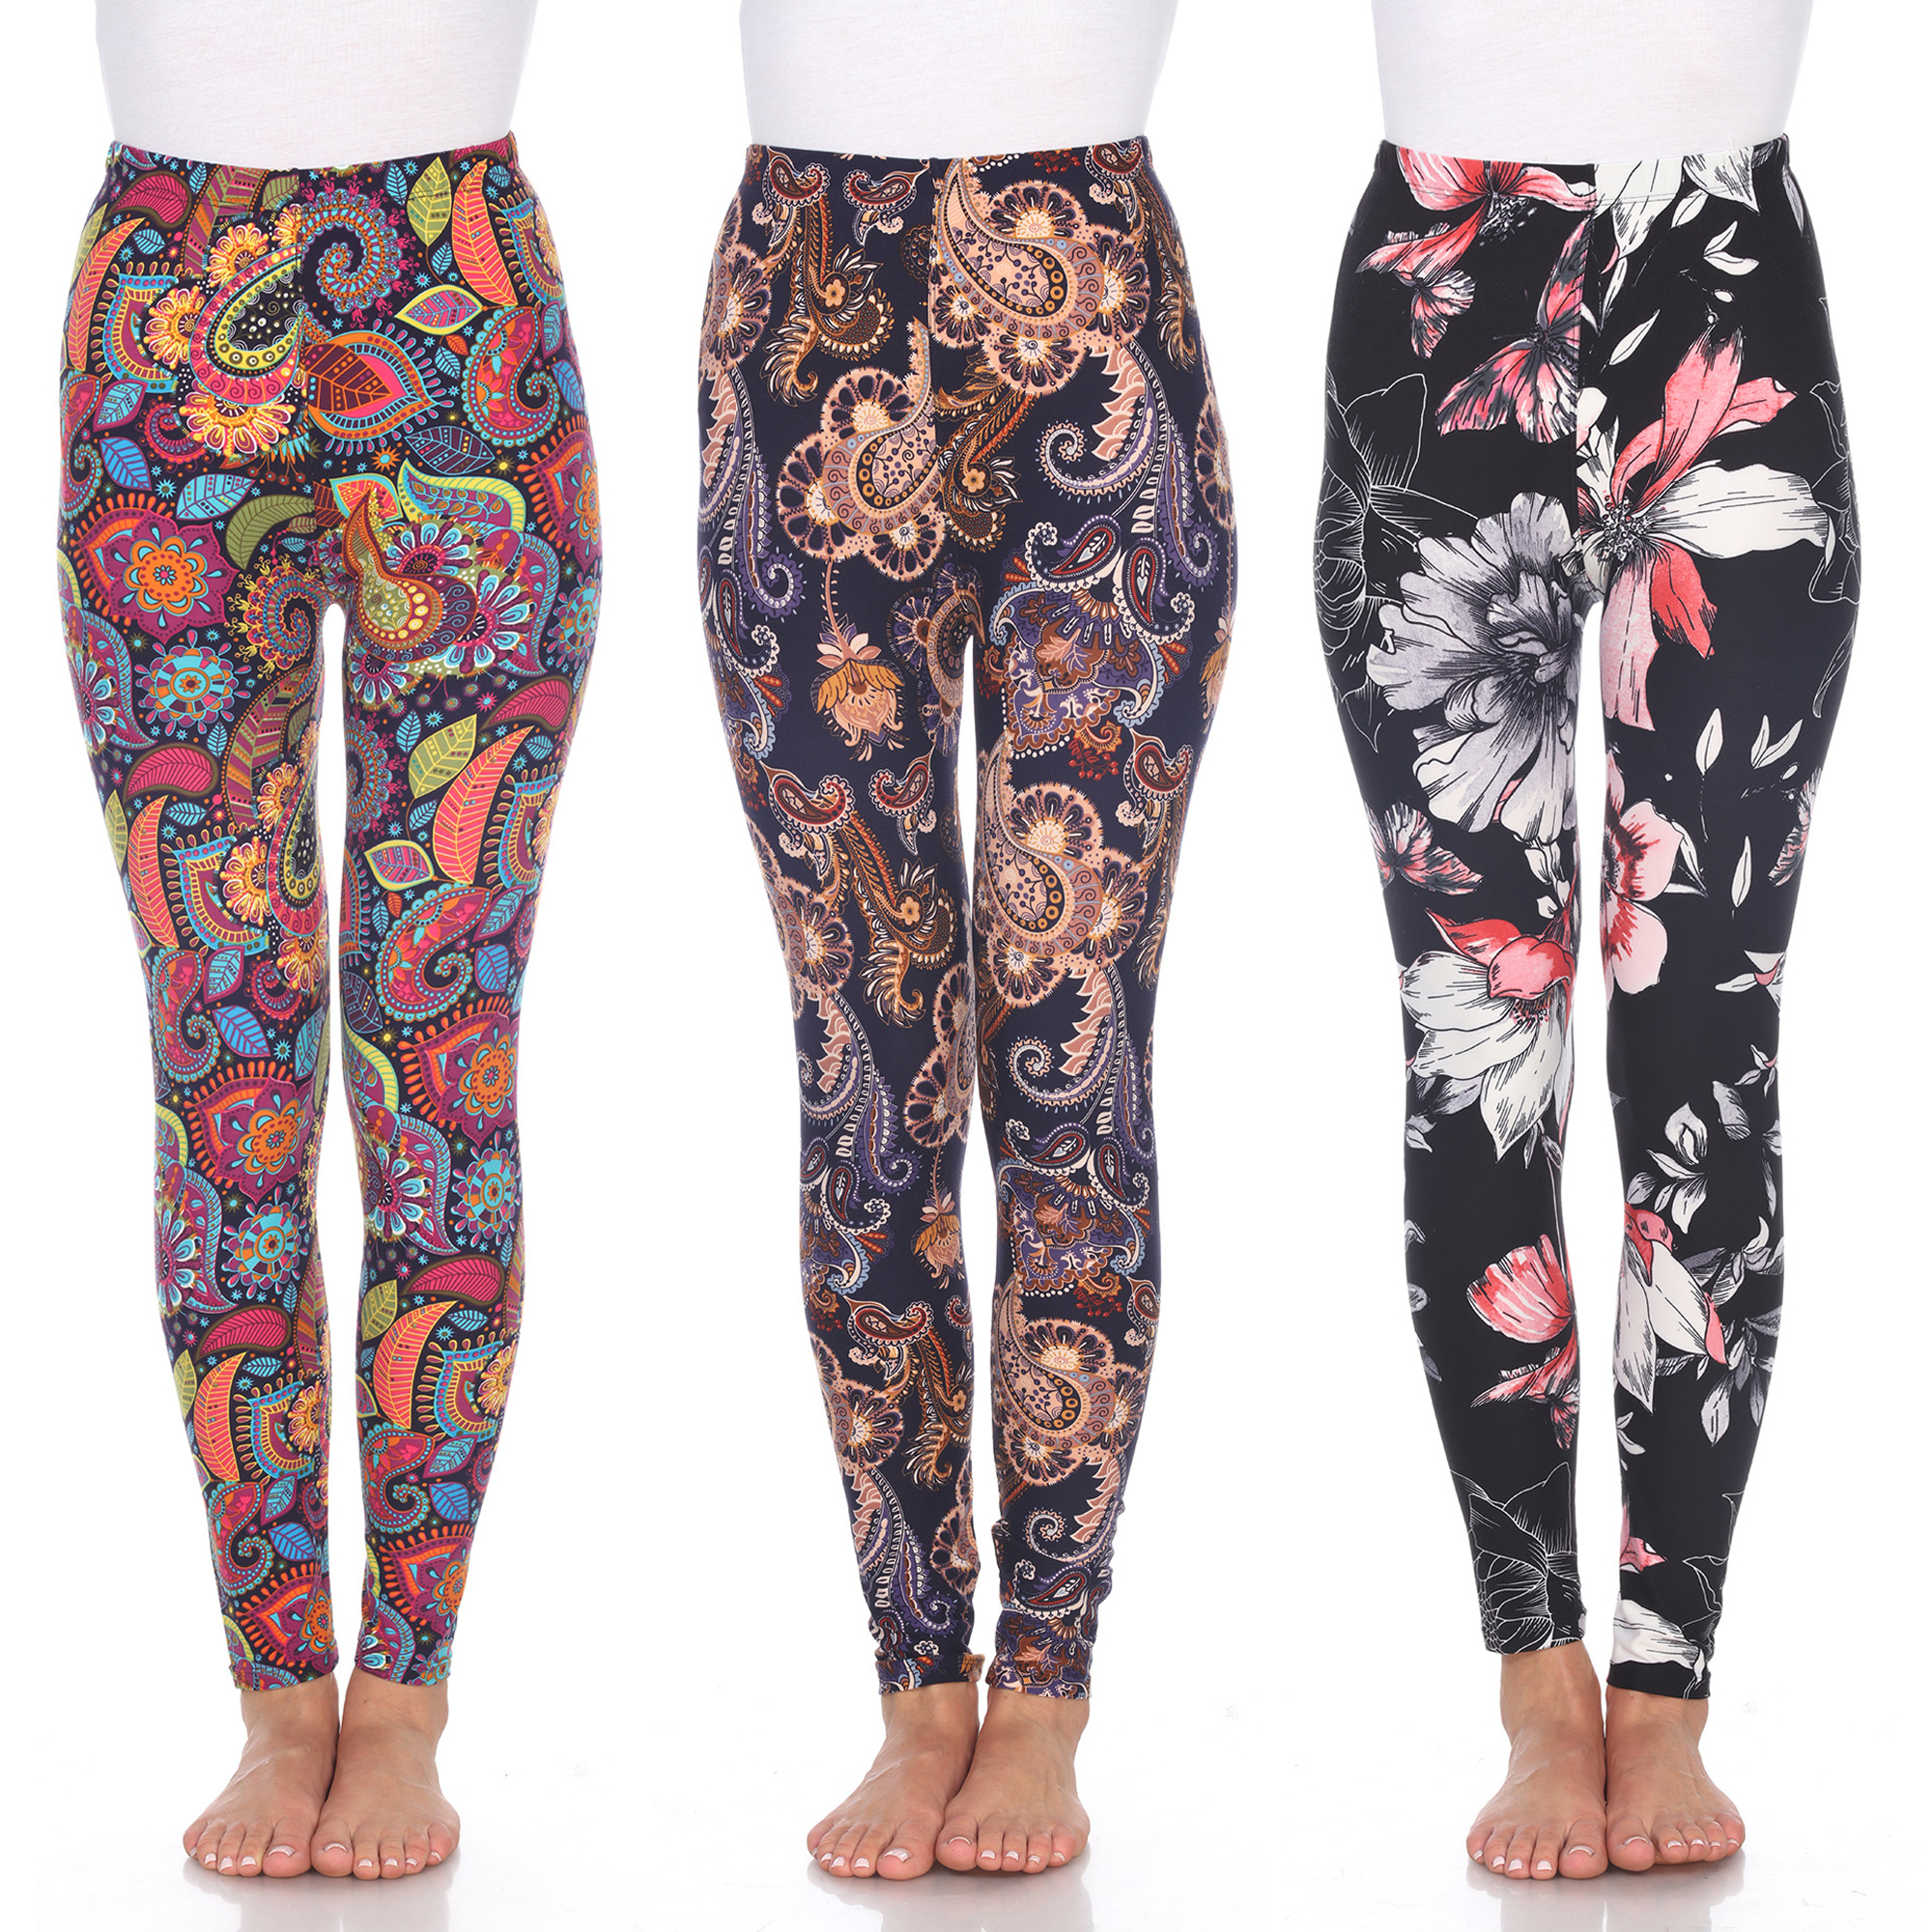 White Mark Women's Pack Of 3 Paisley Mix Leggings - Colorful Paisley,Purple/Gold Paisley, White/Coral/Black, One Size - Regular